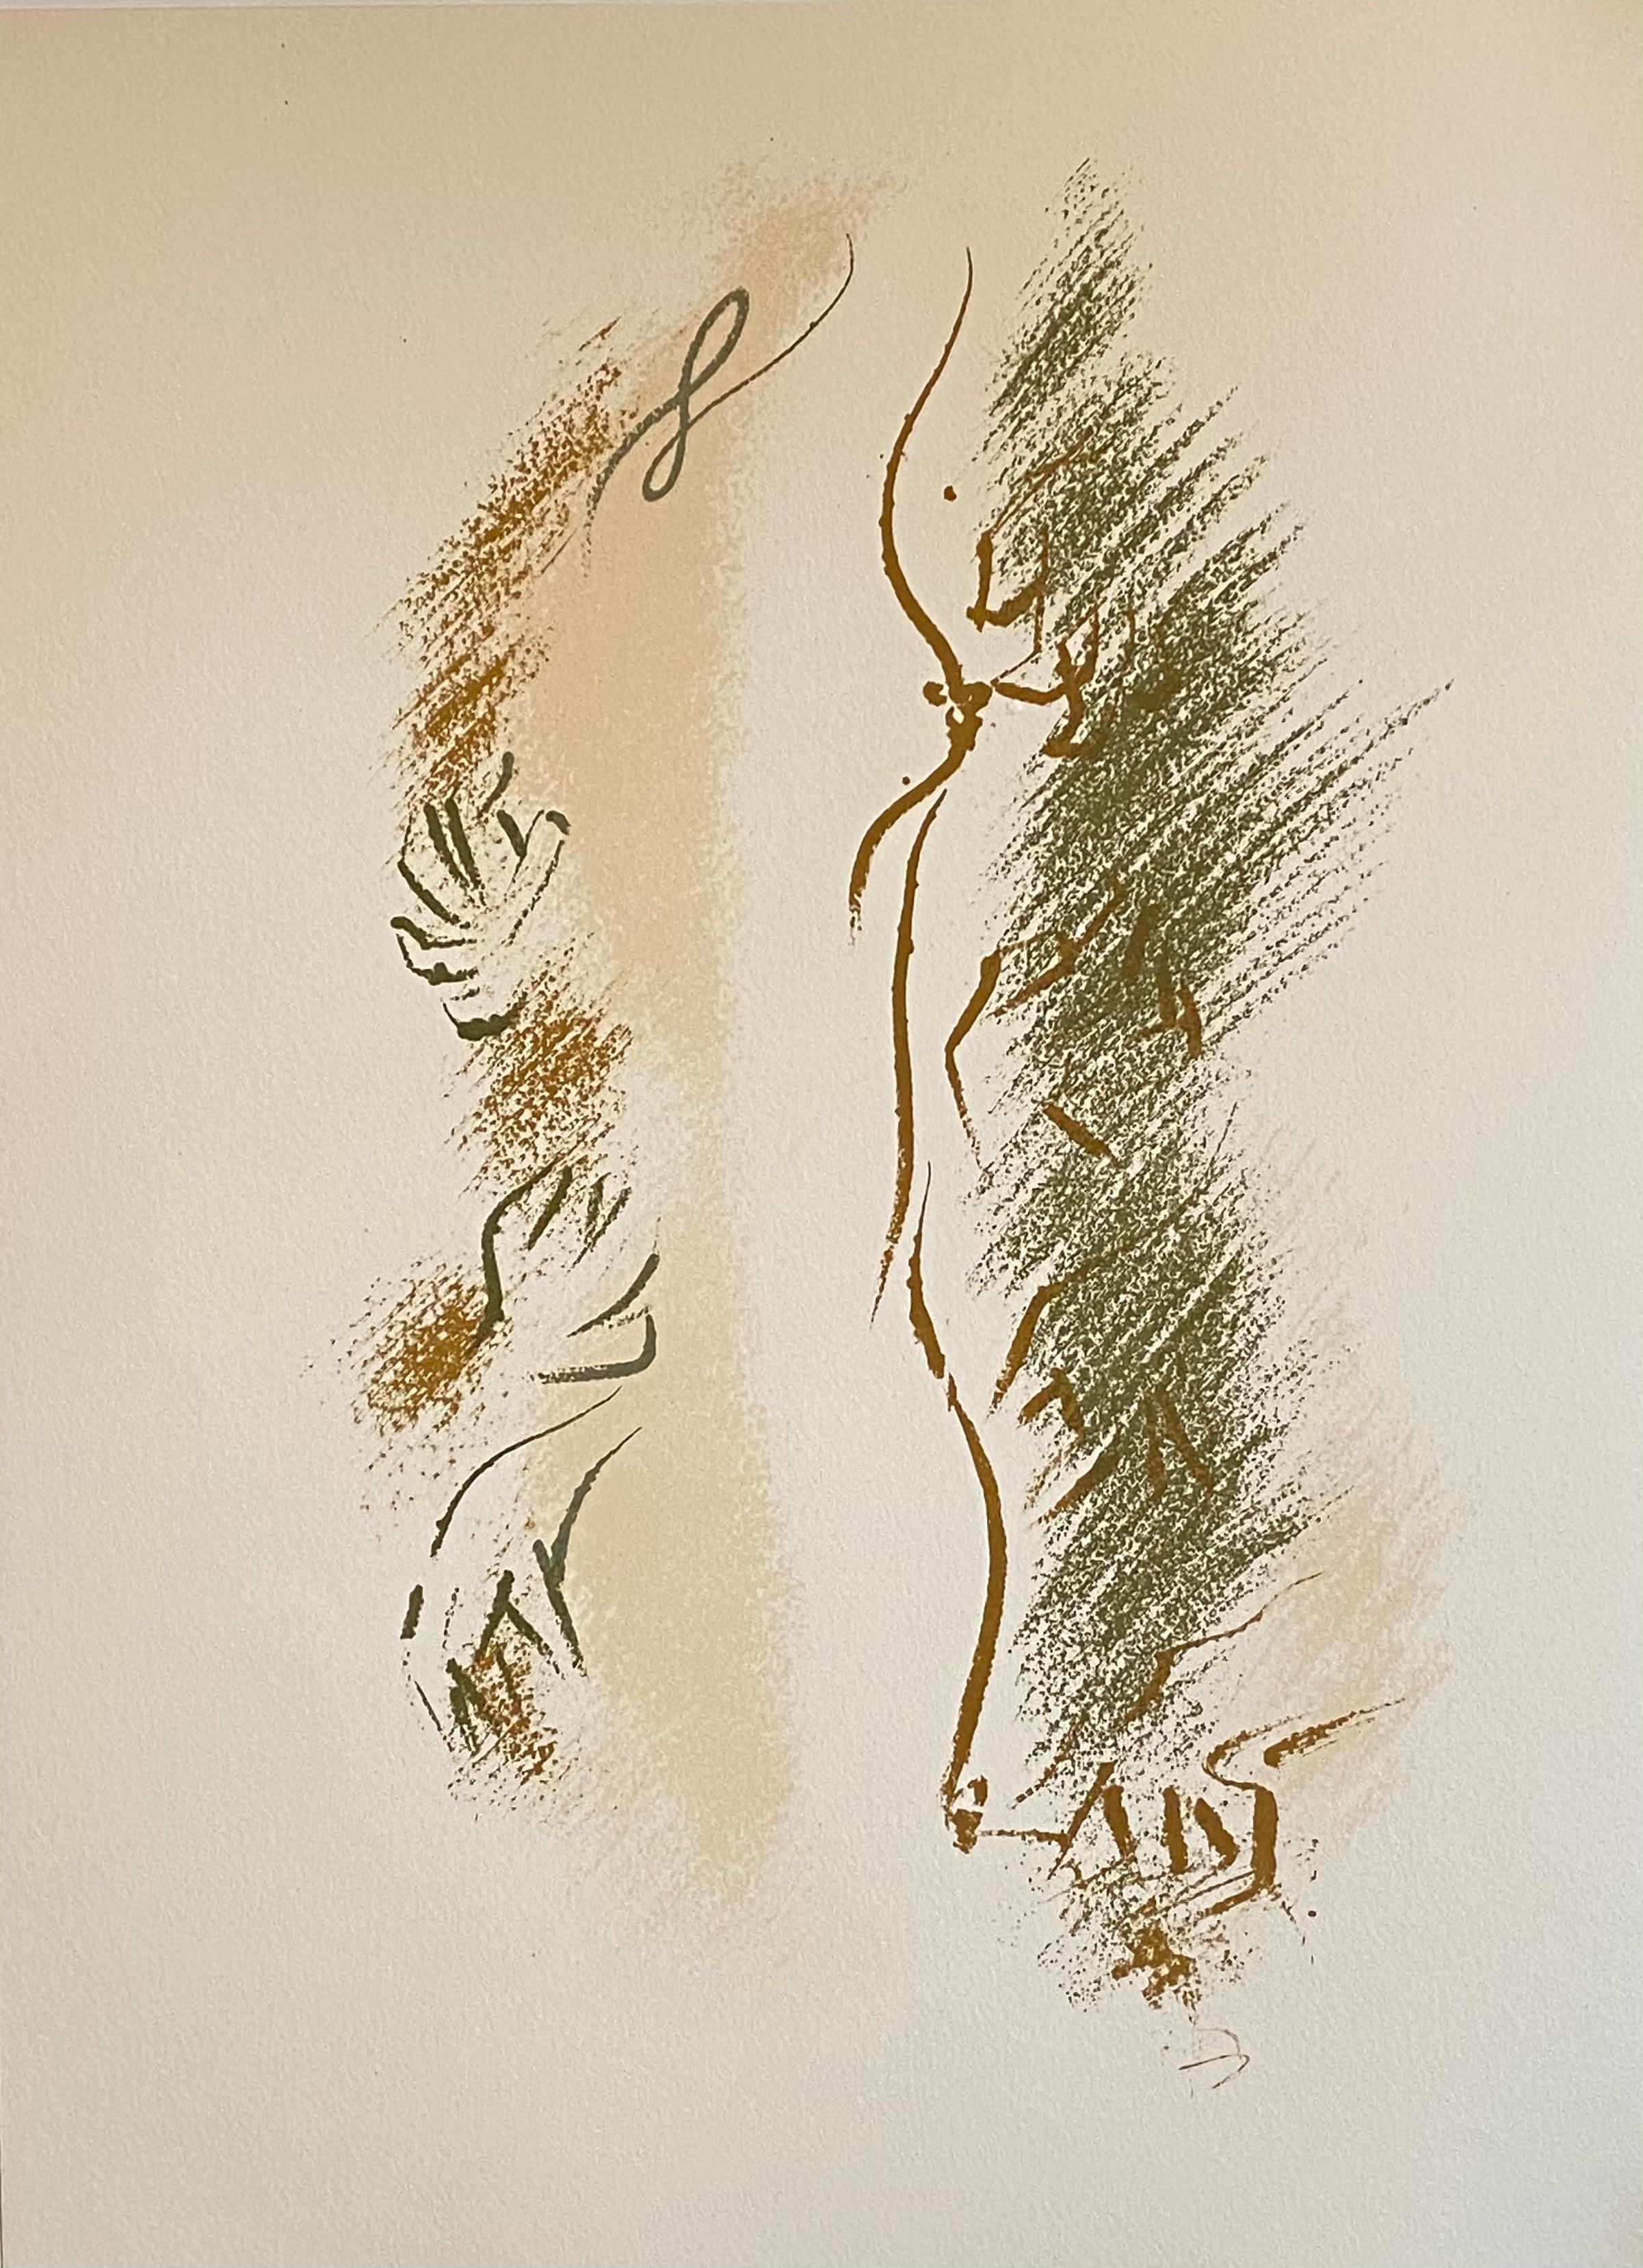 André Masson Figurative Print - French Abstract Surrealist Lithograph Andre Masson Mourlot Paris Limited Edition